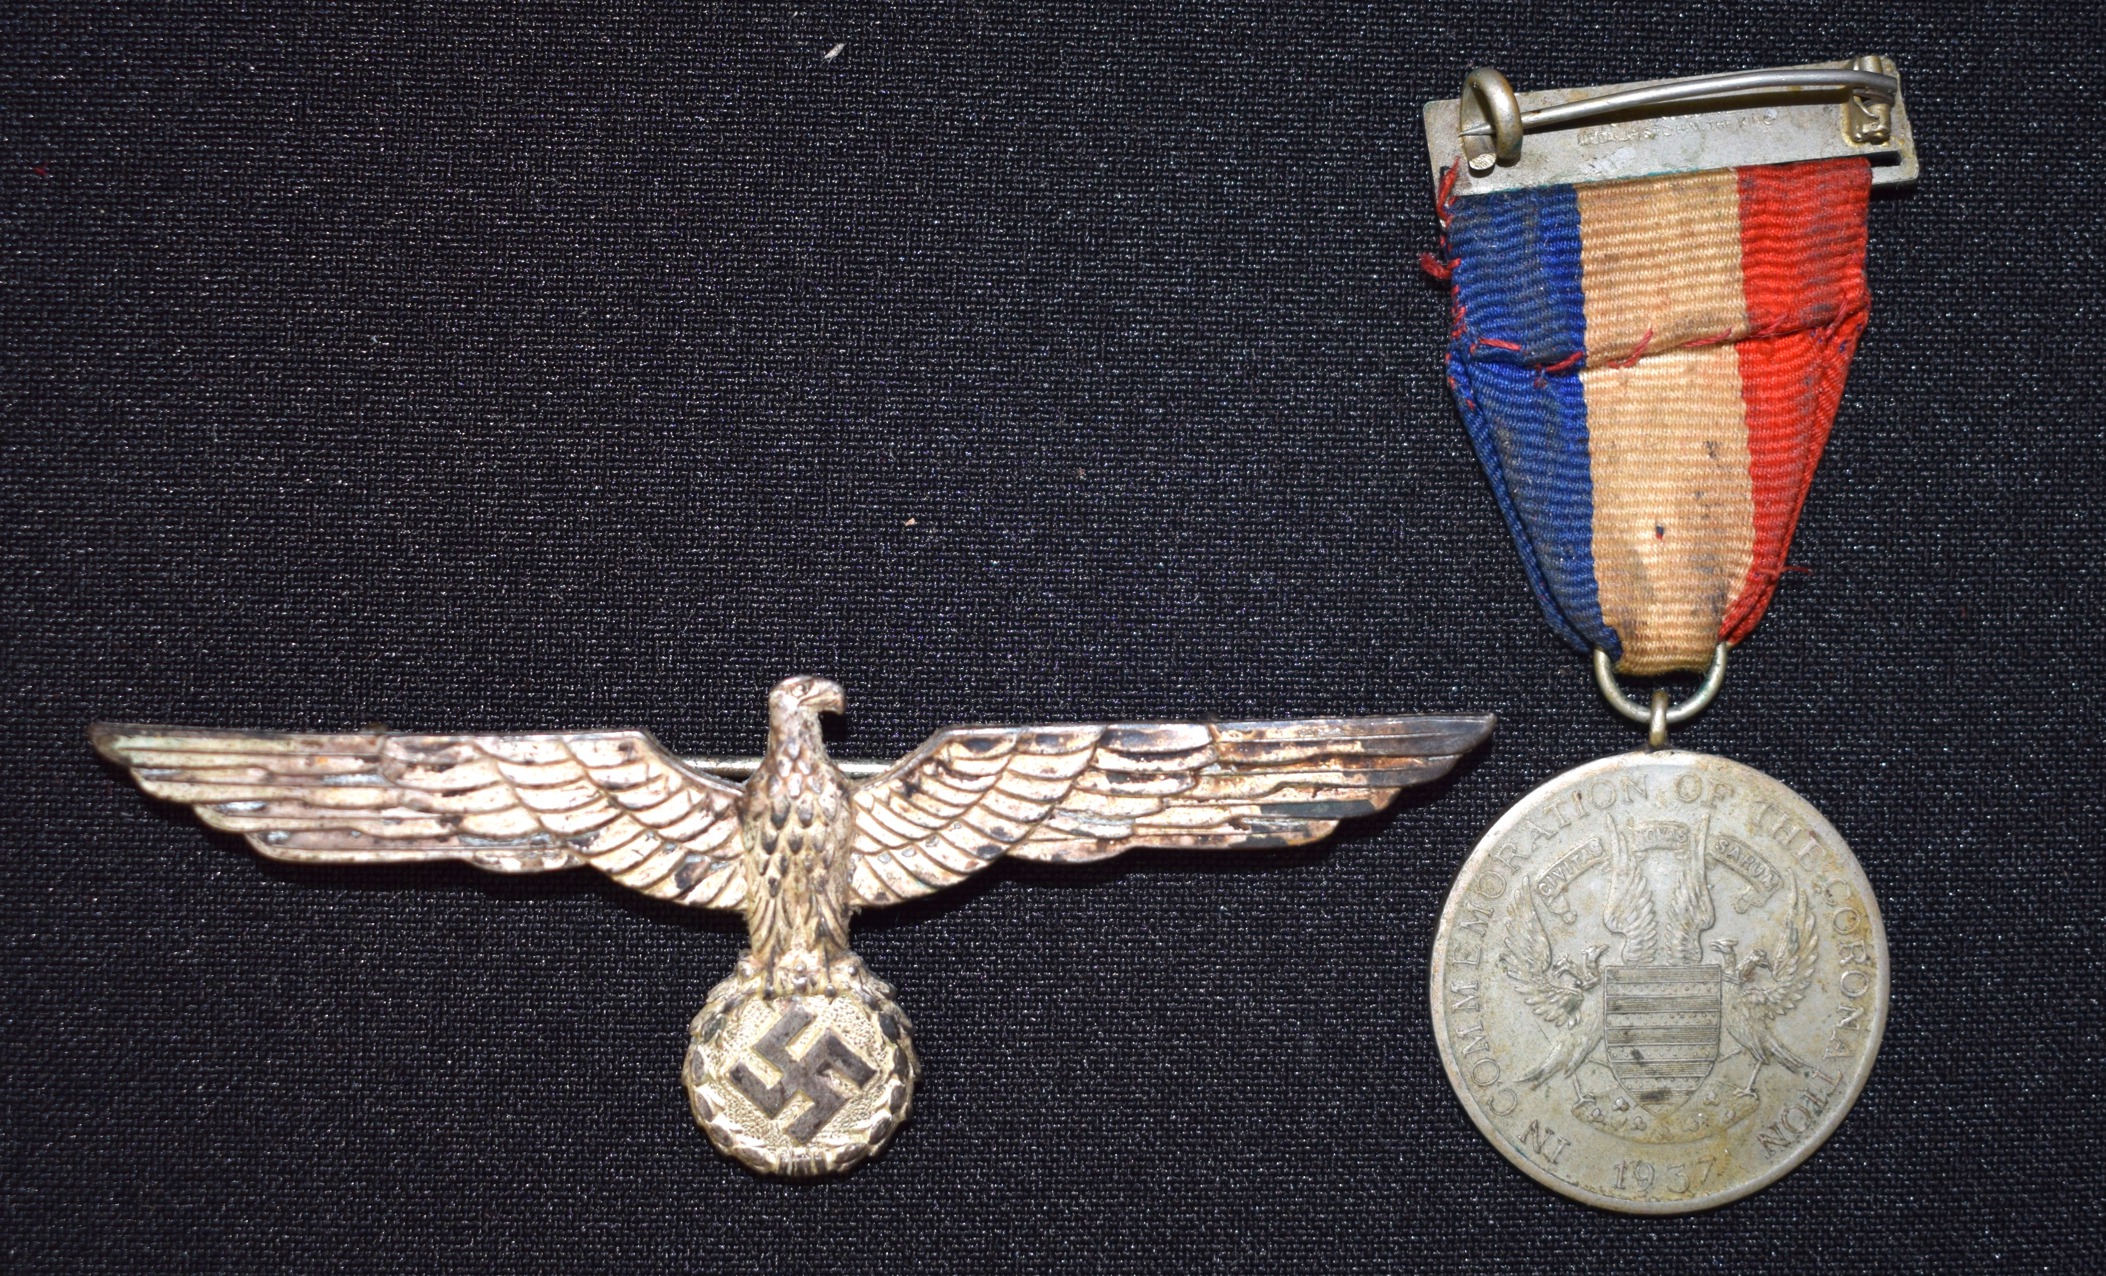 A NAZI MEDAL, together with another medal. (2)